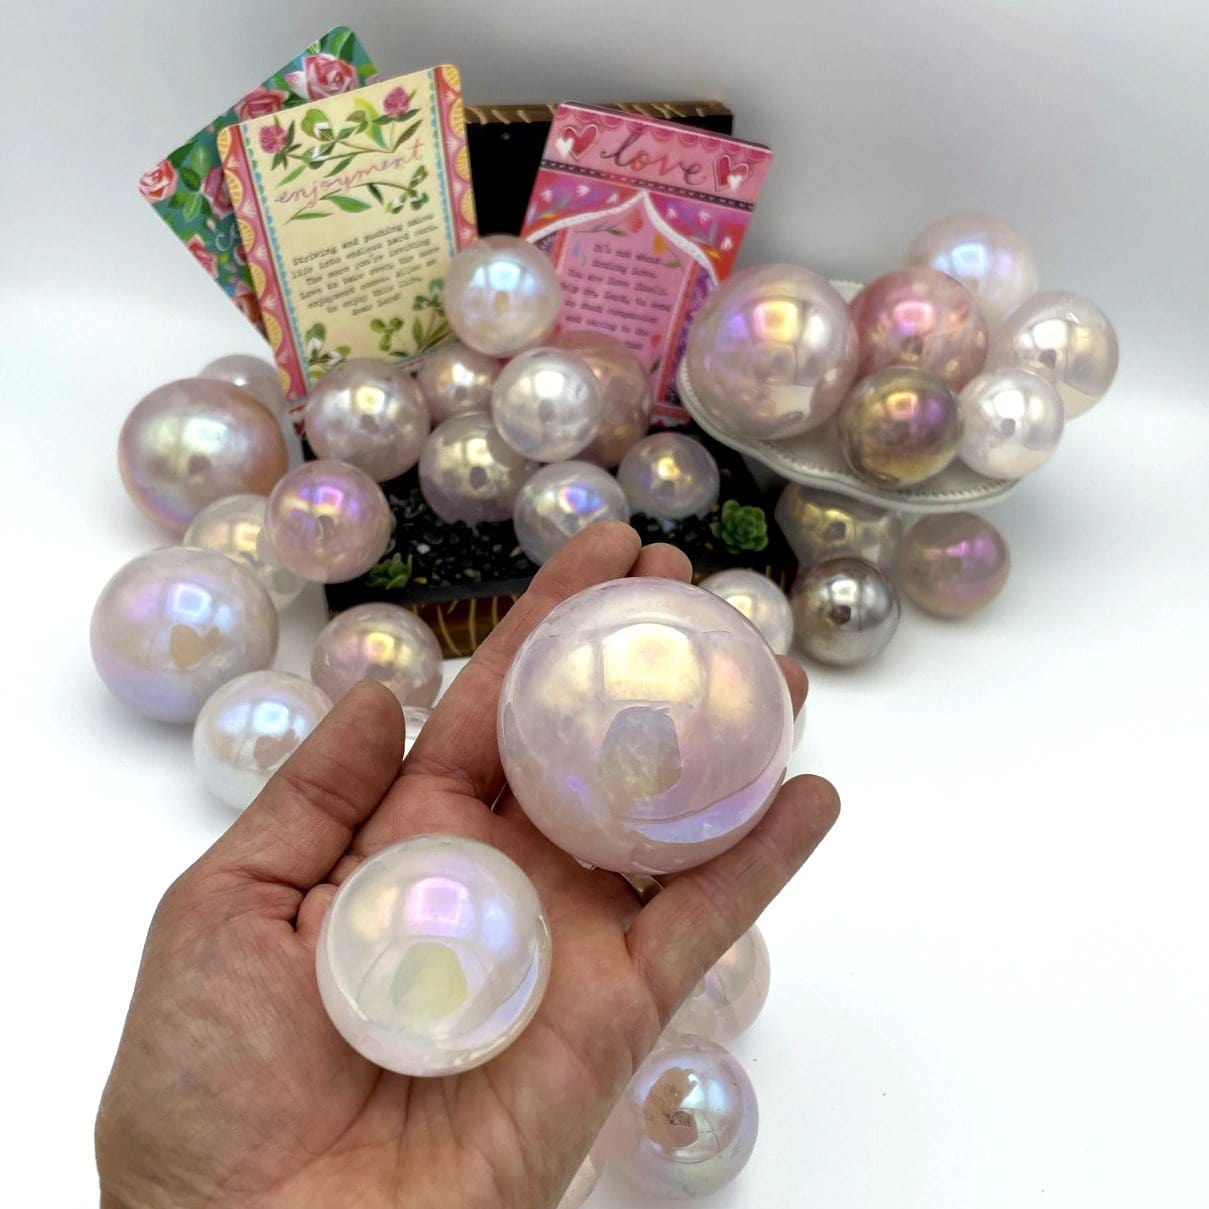 Hand holding 2 Rose Quartz Angel Aura Titanium Spheres of different sizes in front of more spheres and decorations in the background